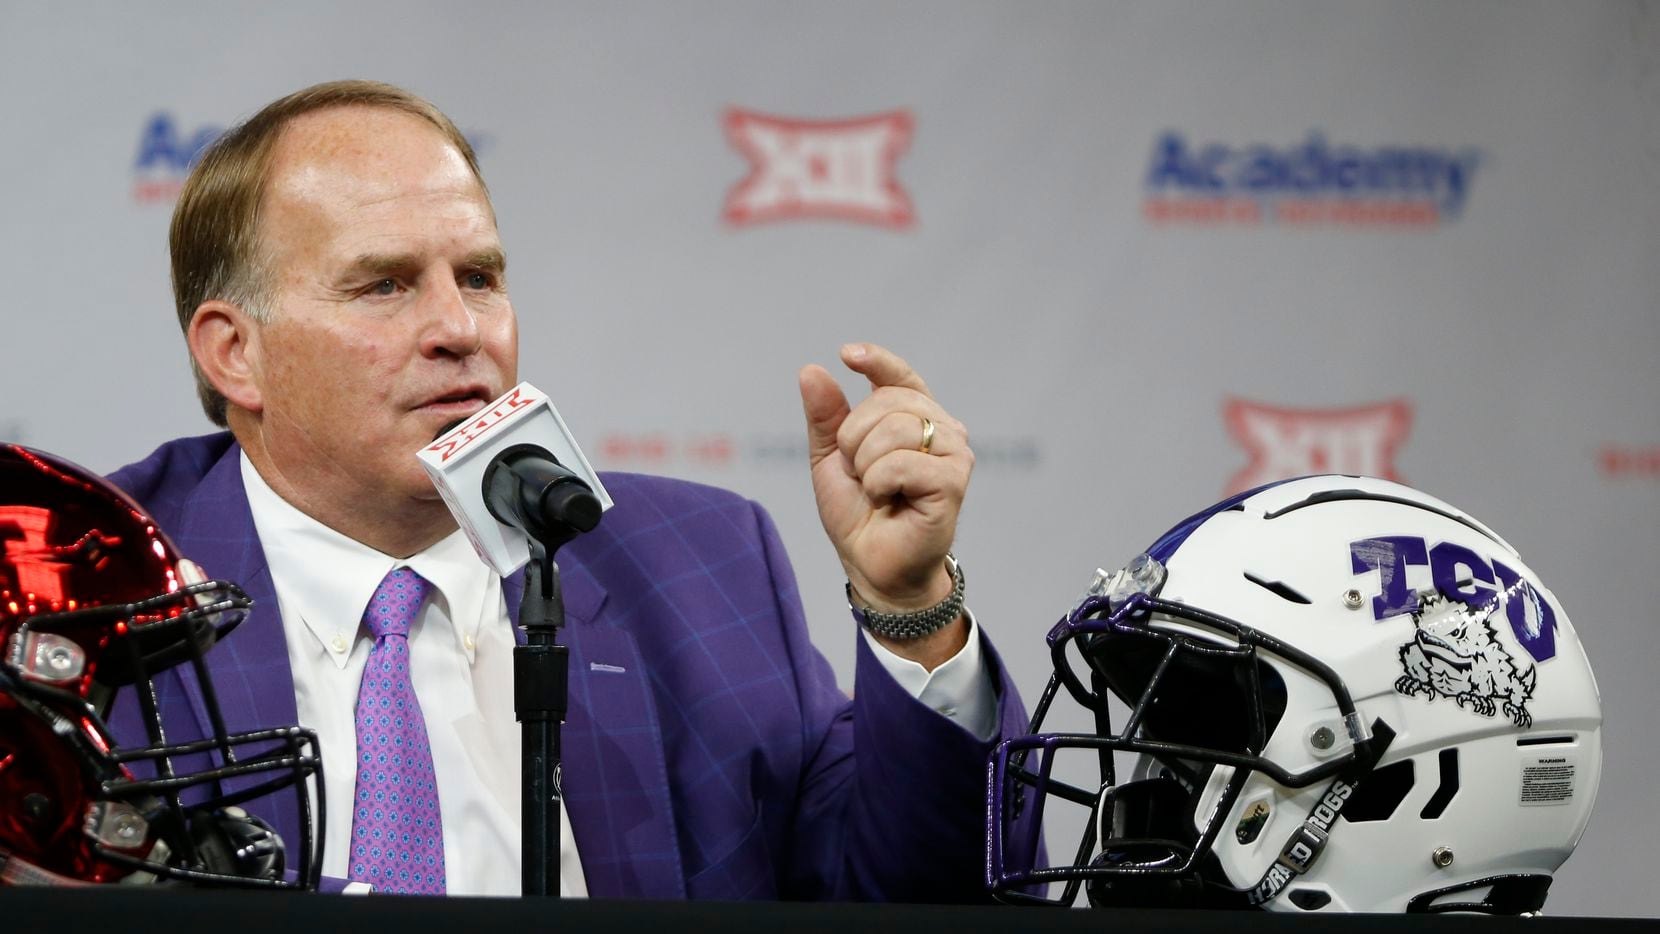 Despite building an unprecedented legacy at TCU, Gary Patterson's  eccentricities ultimately cost him